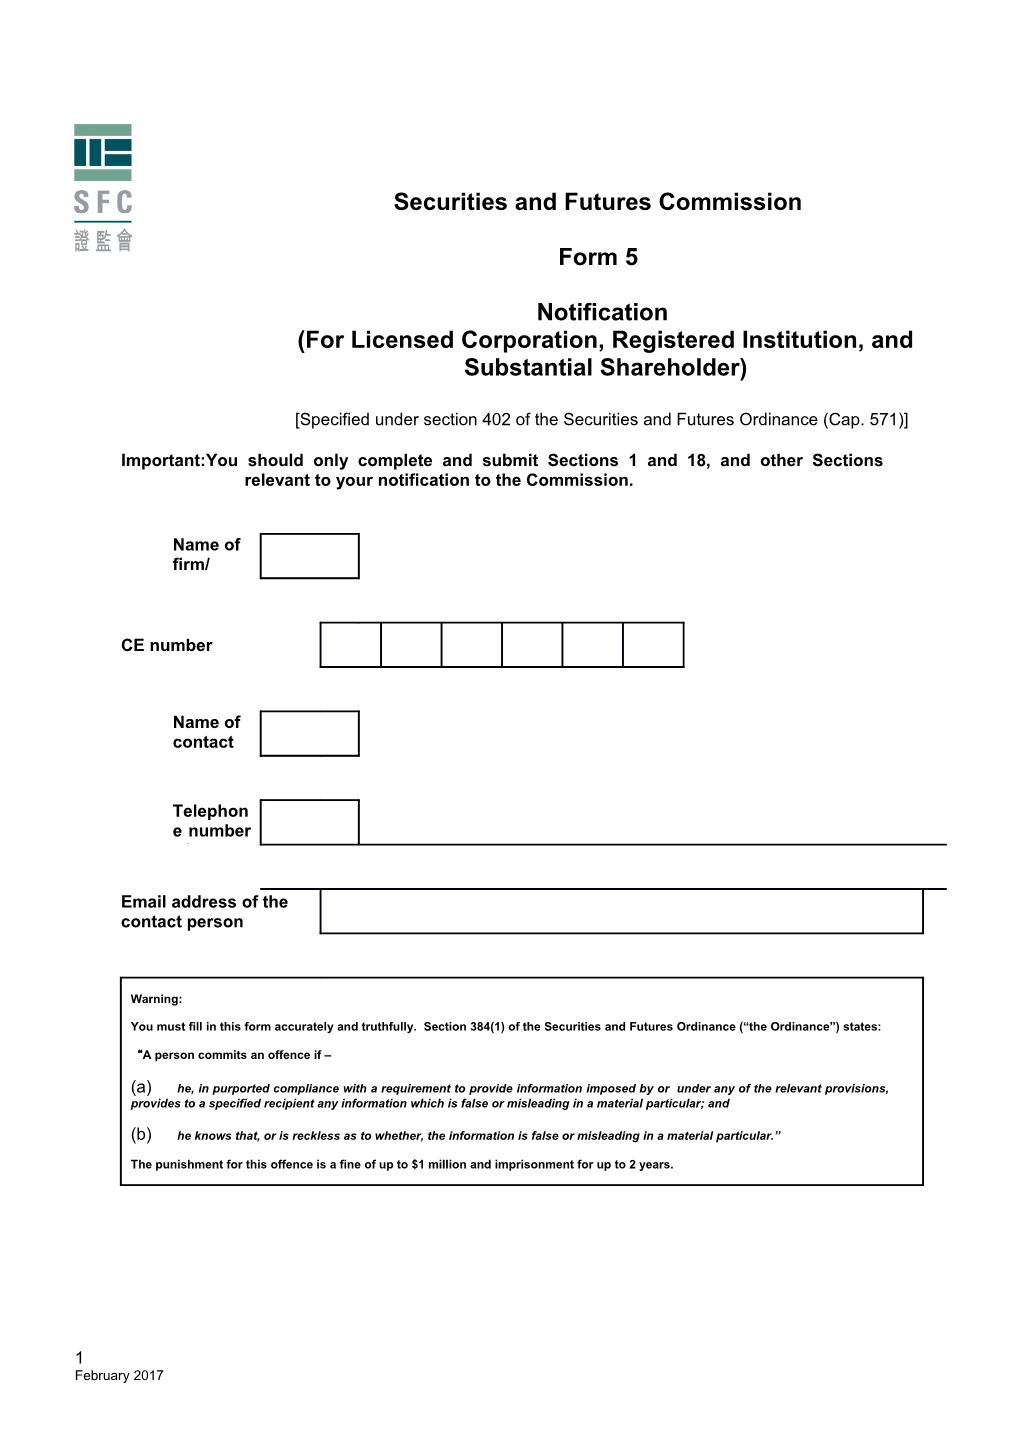 Securities and Futures Commission Form 5 Notification (For Licensed Corporation, Registered